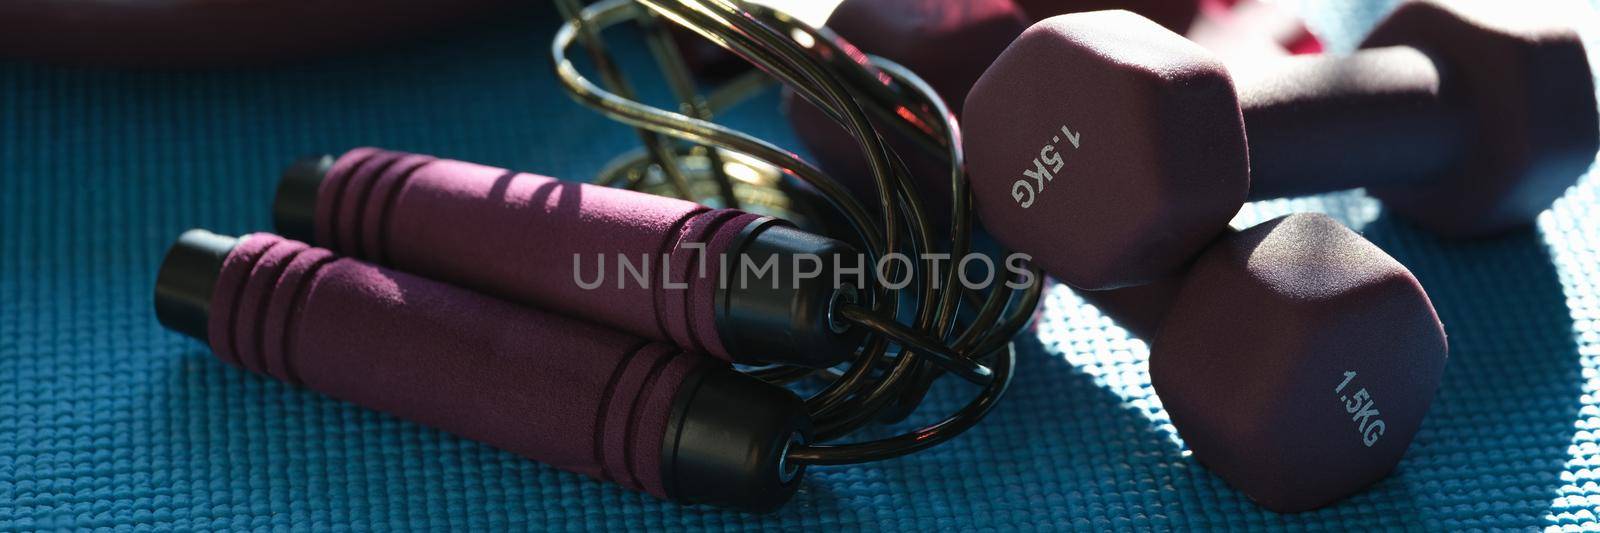 Sports accessories dumbbell skipping rope lie on mat. Daily sports concept